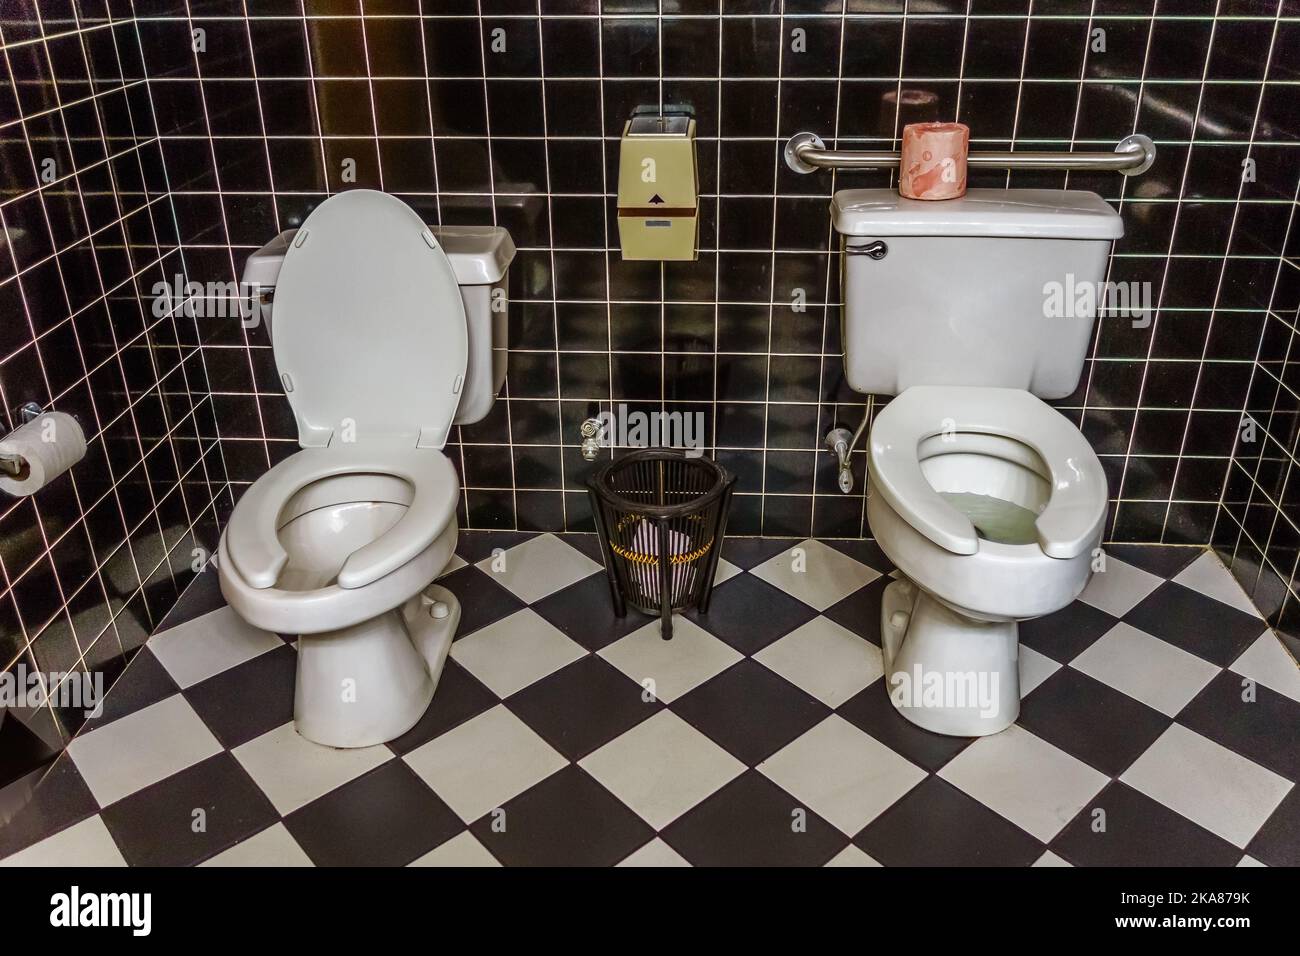 Public restroom with two toilets side by side, an unusual and humorous sight. Stock Photo